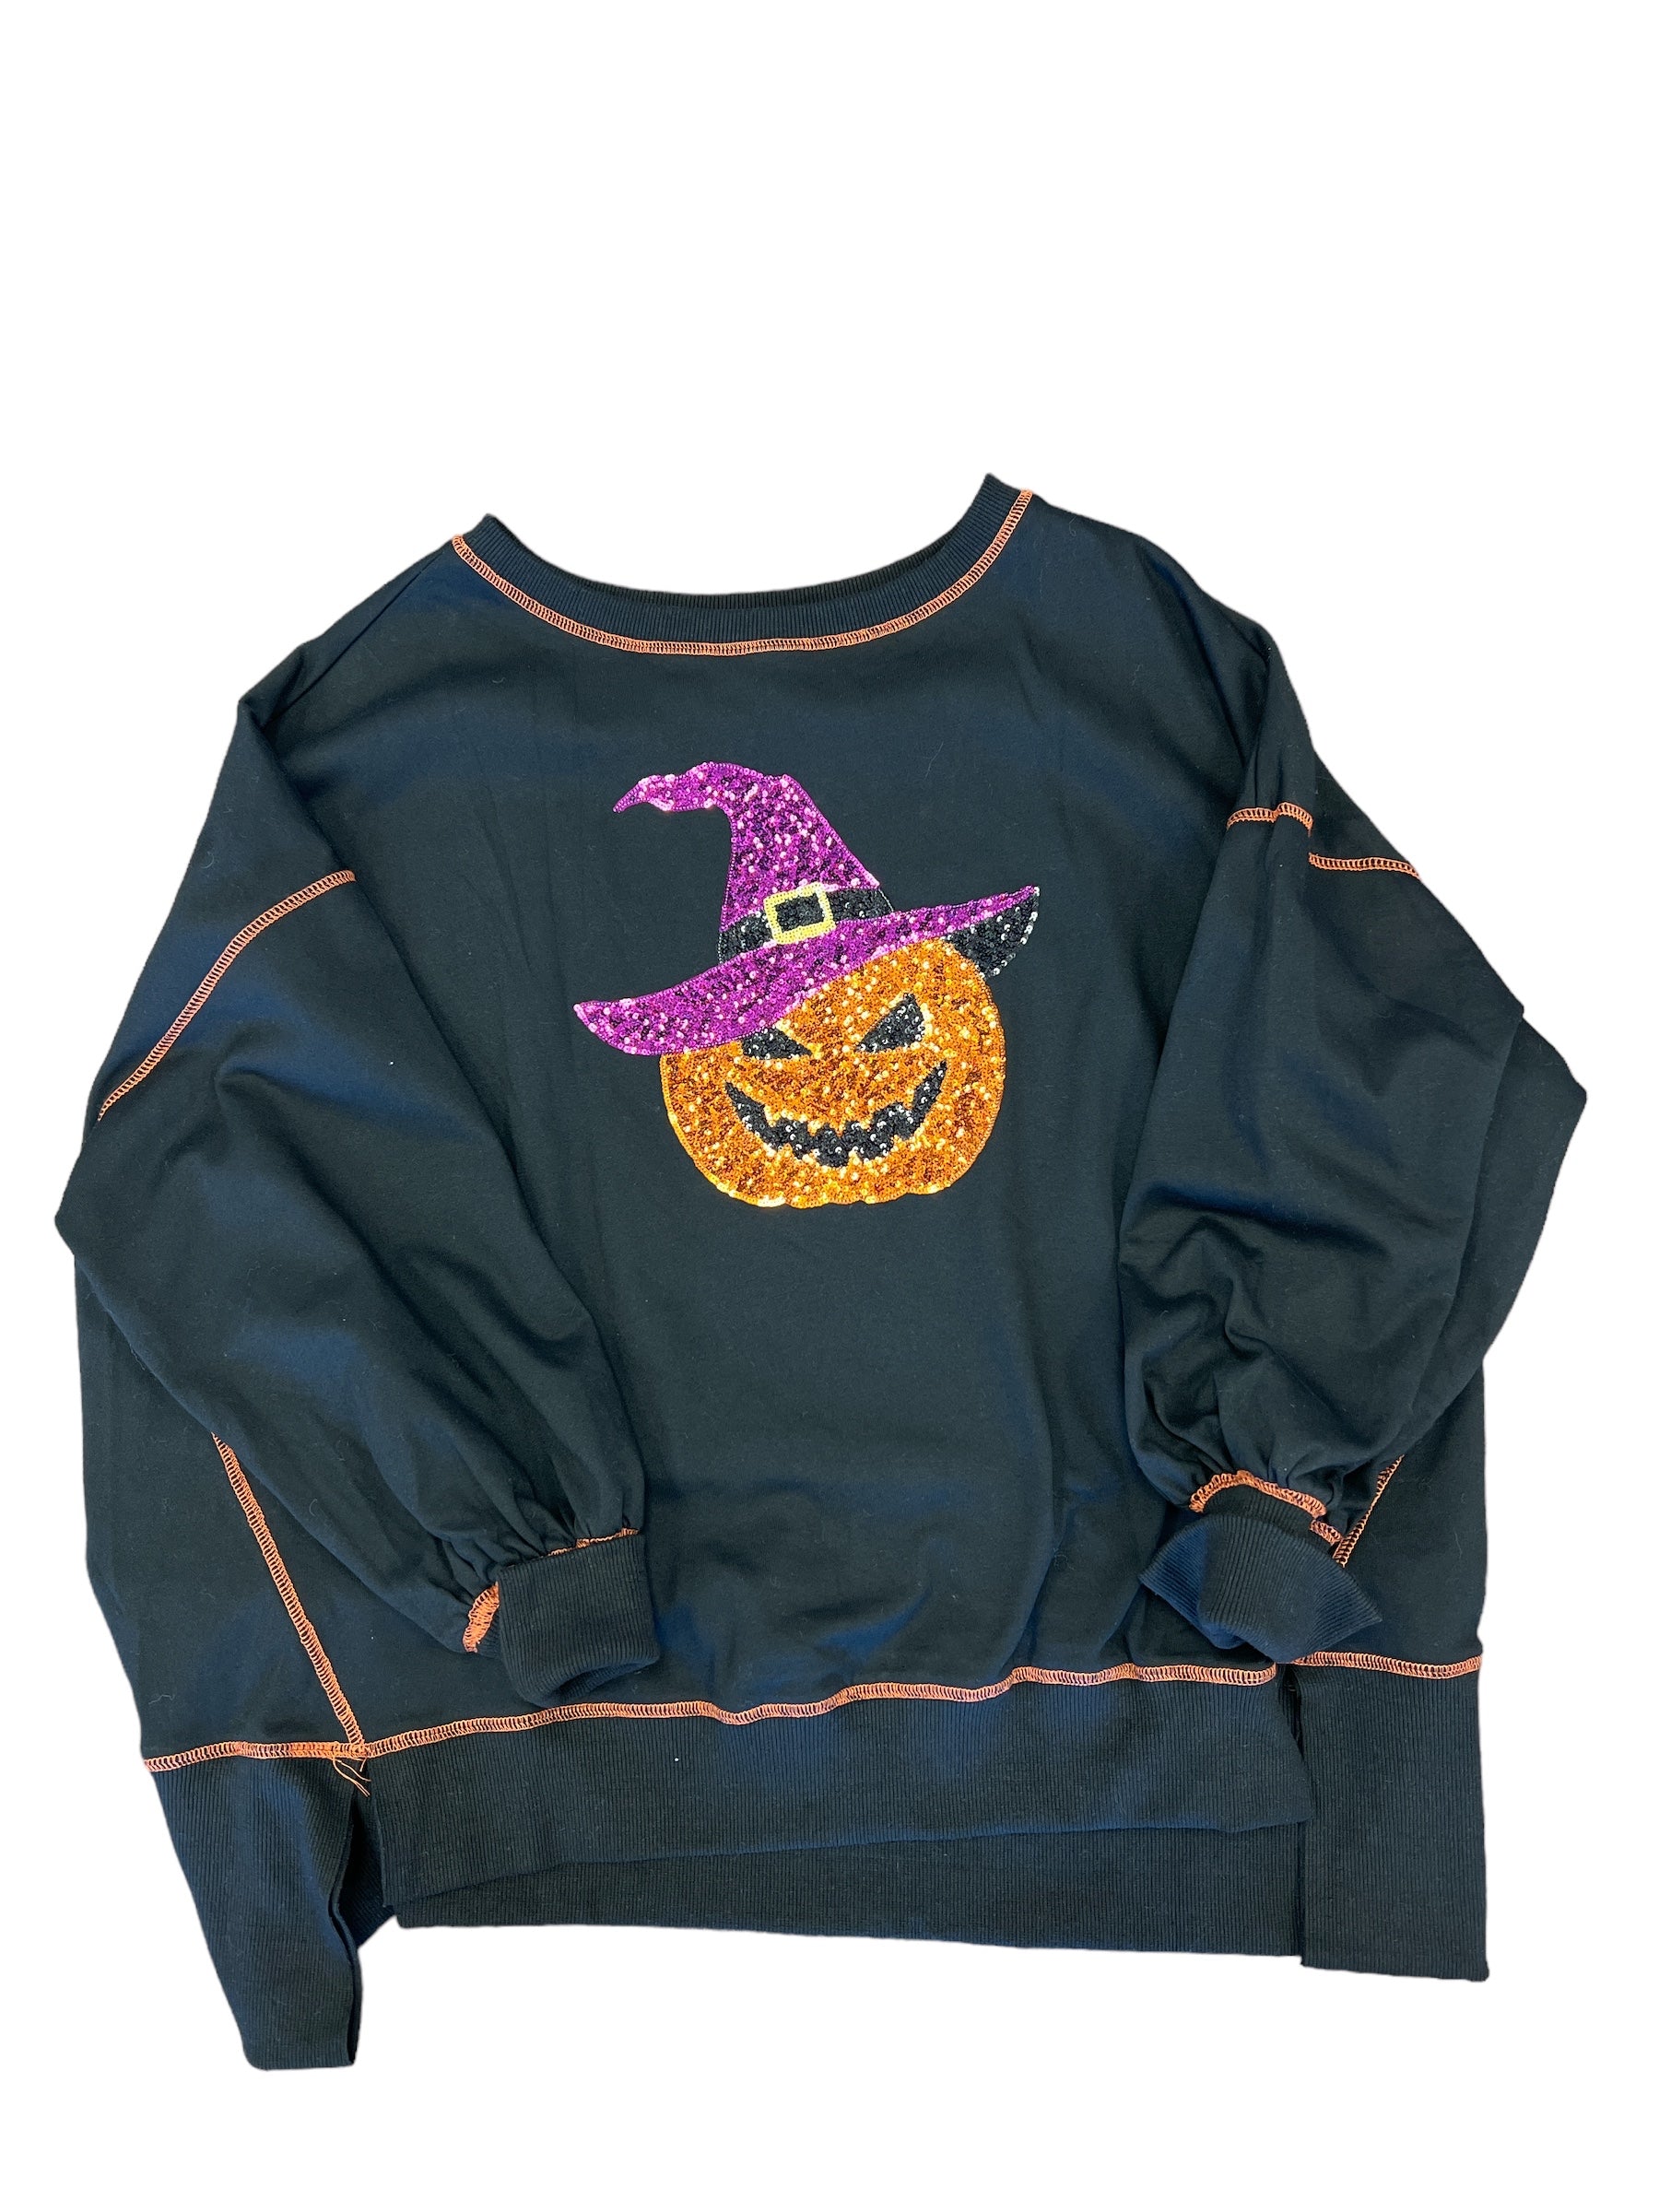 Oh Pumpkin Sequin Sweatshirt-140 Sweaters, Cardigans & Sweatshirts-Simply Stylish Boutique-Simply Stylish Boutique | Women’s & Kid’s Fashion | Paducah, KY